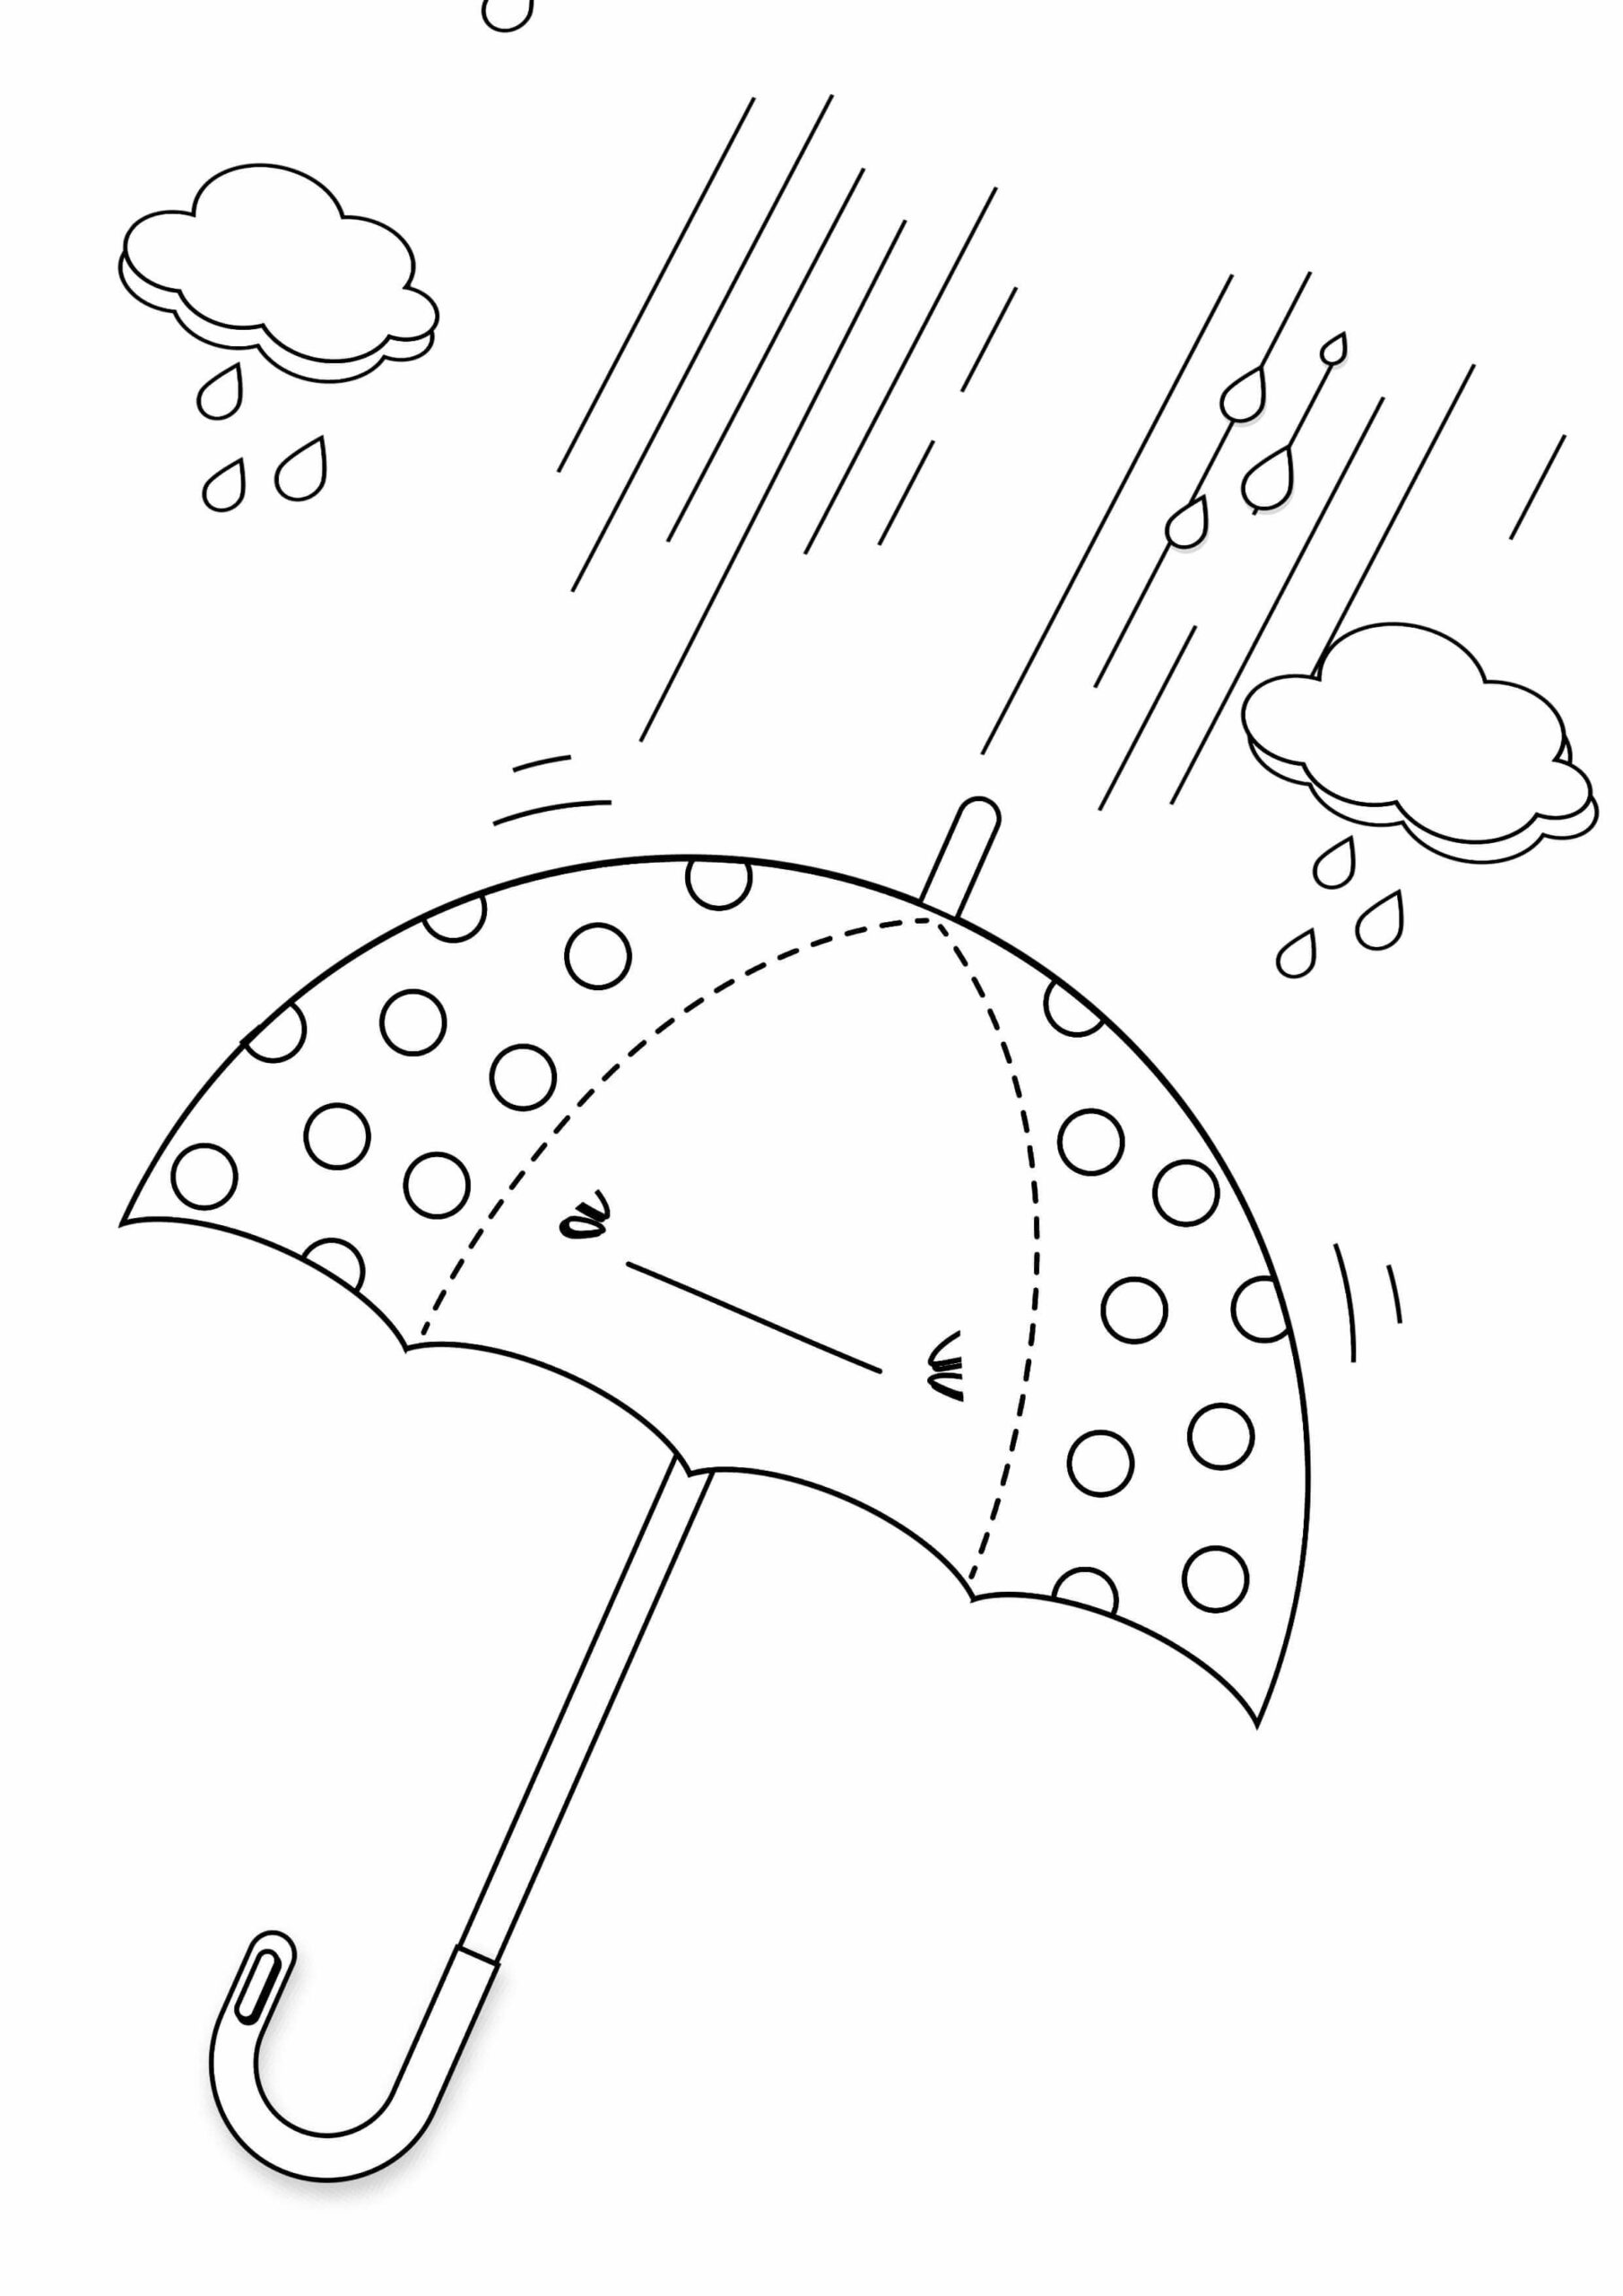 Liquid Precipitation From Clouds coloring page - Download, Print or ...